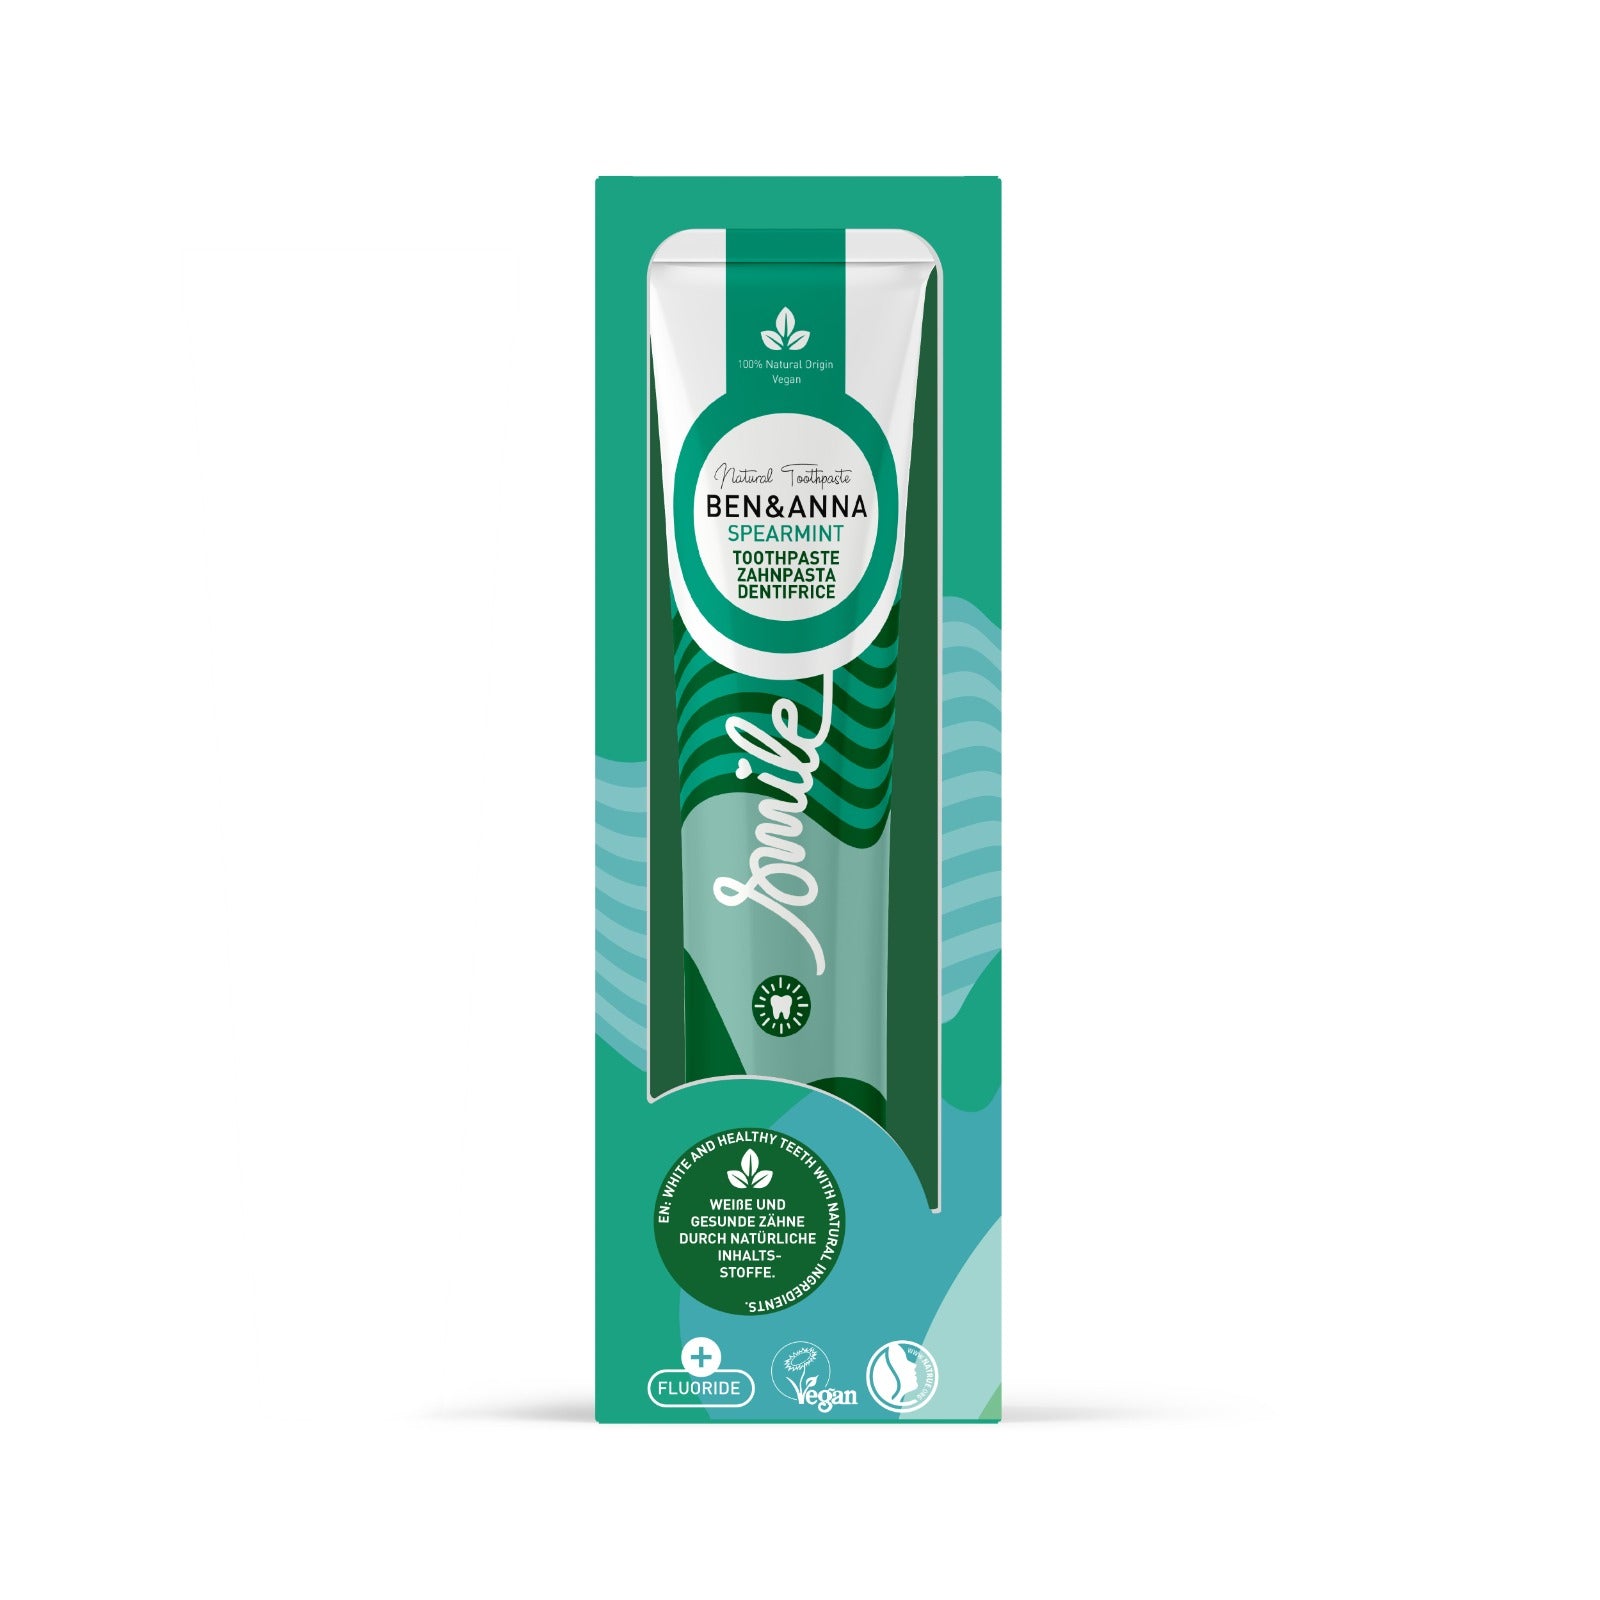 Toothpaste tube - Spearmint with fluoride